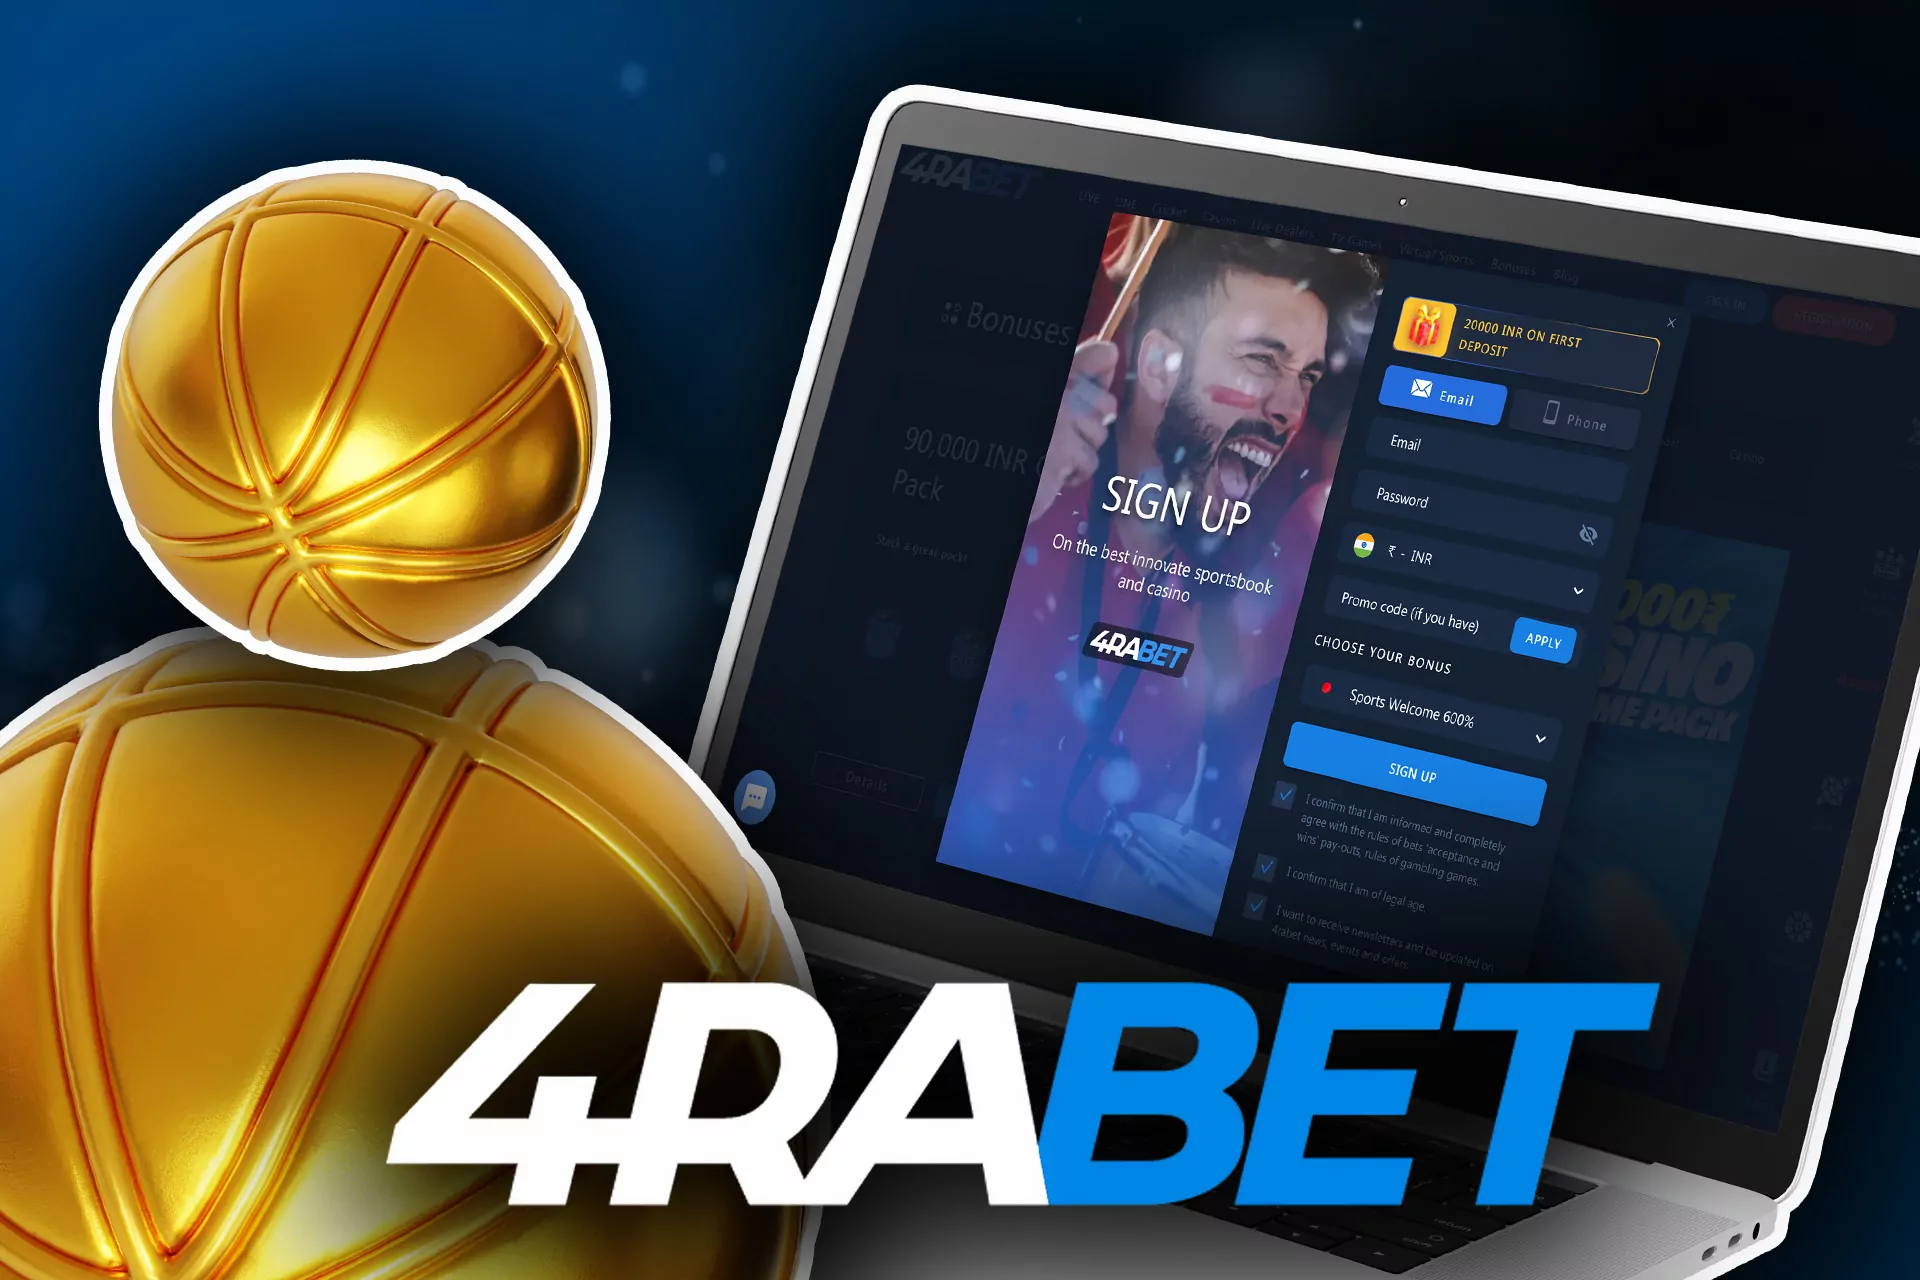 Create an account to start betting in 4rabet.